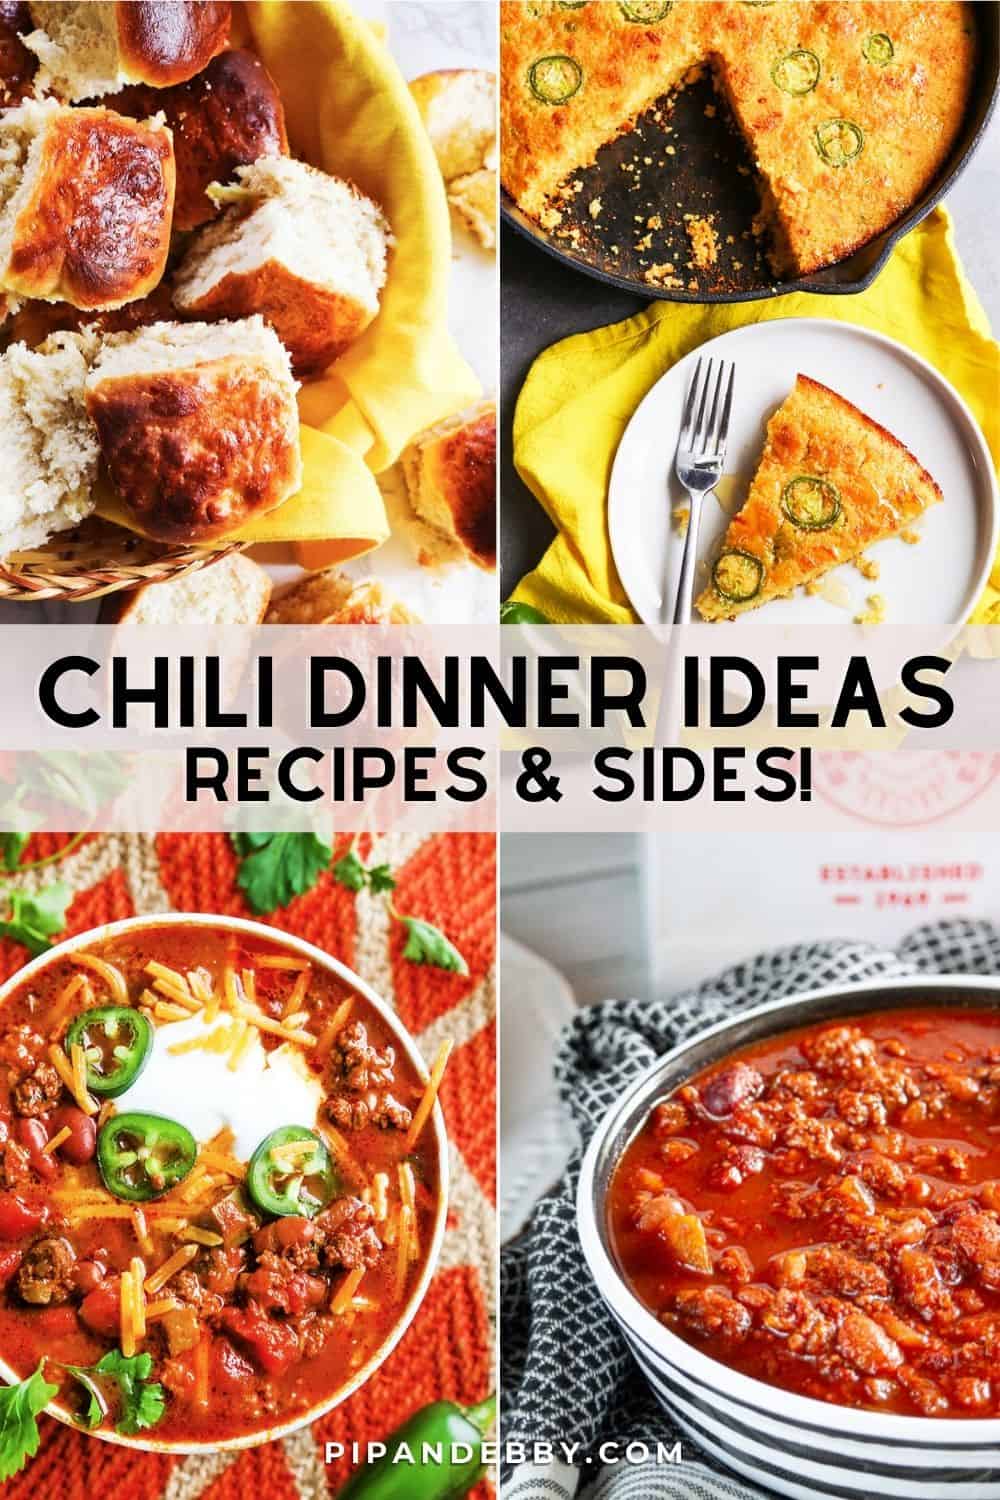 Four recipe photos with text overlay reading, "Chili dinner ideas: recipes and sides!"